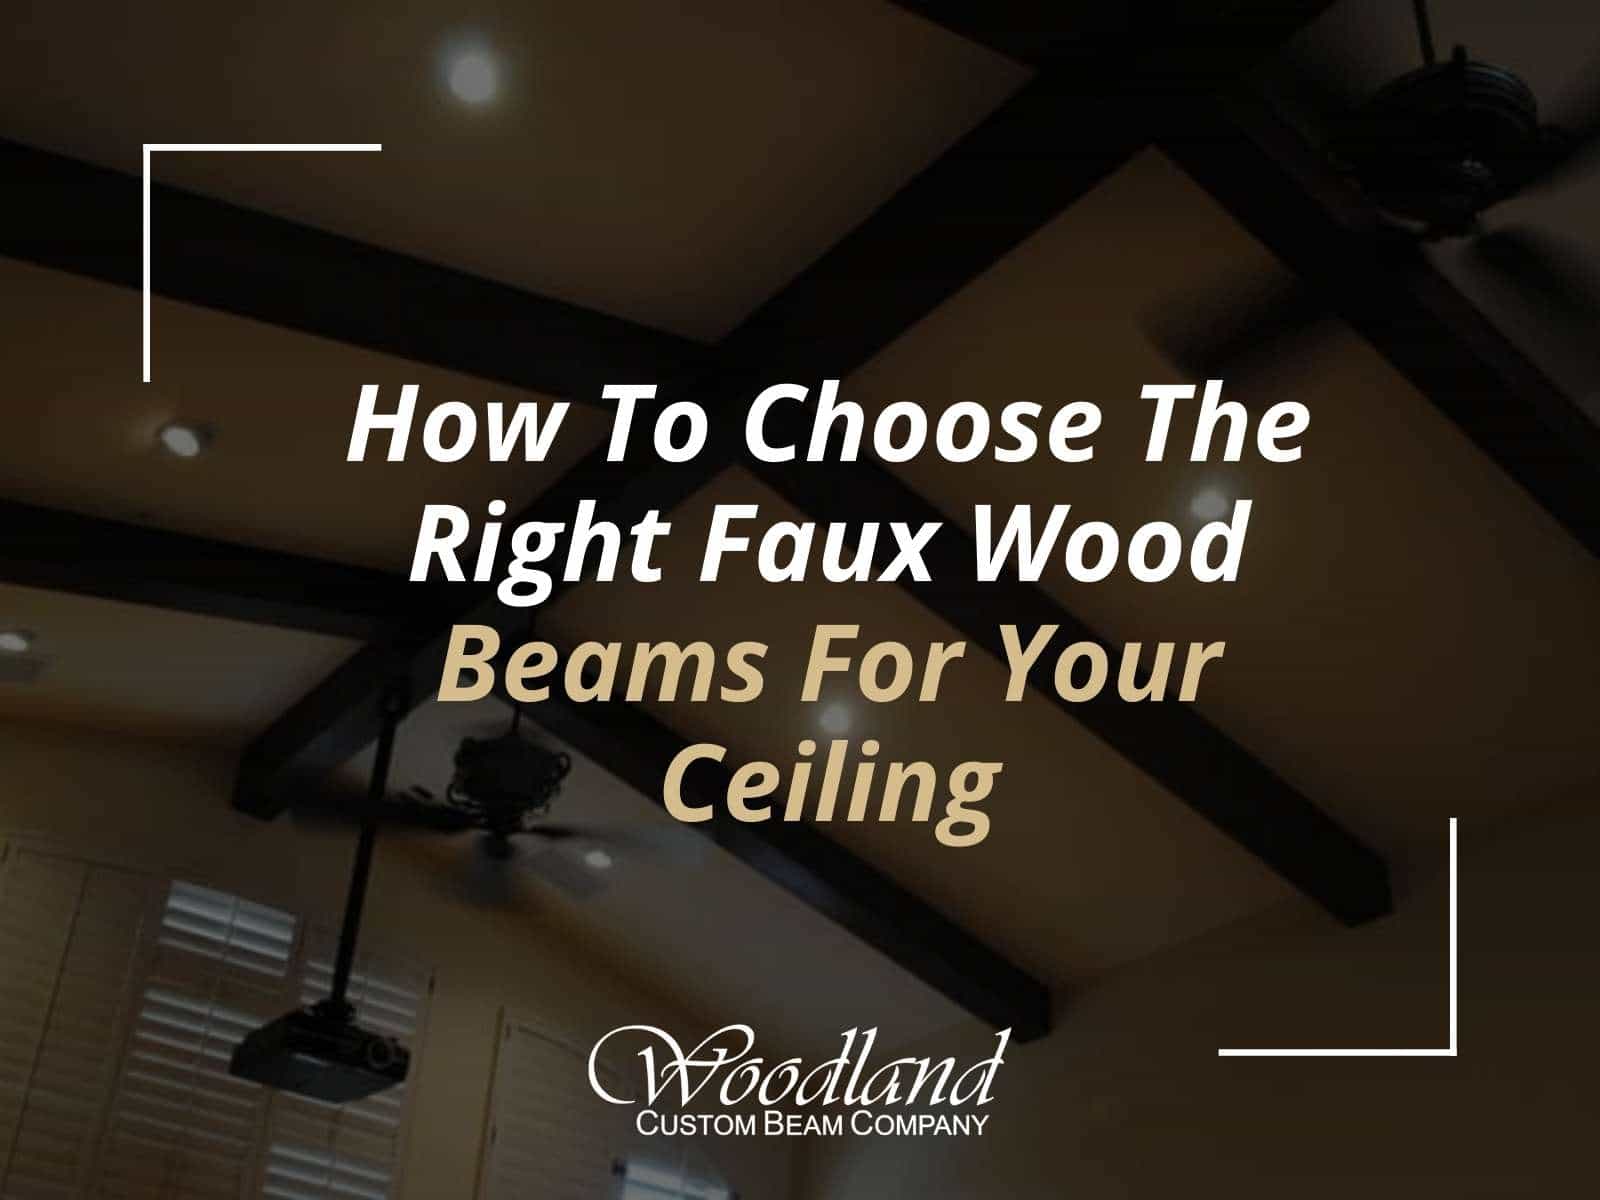 How To Choose The Right Faux Wood Beams For Your Ceiling